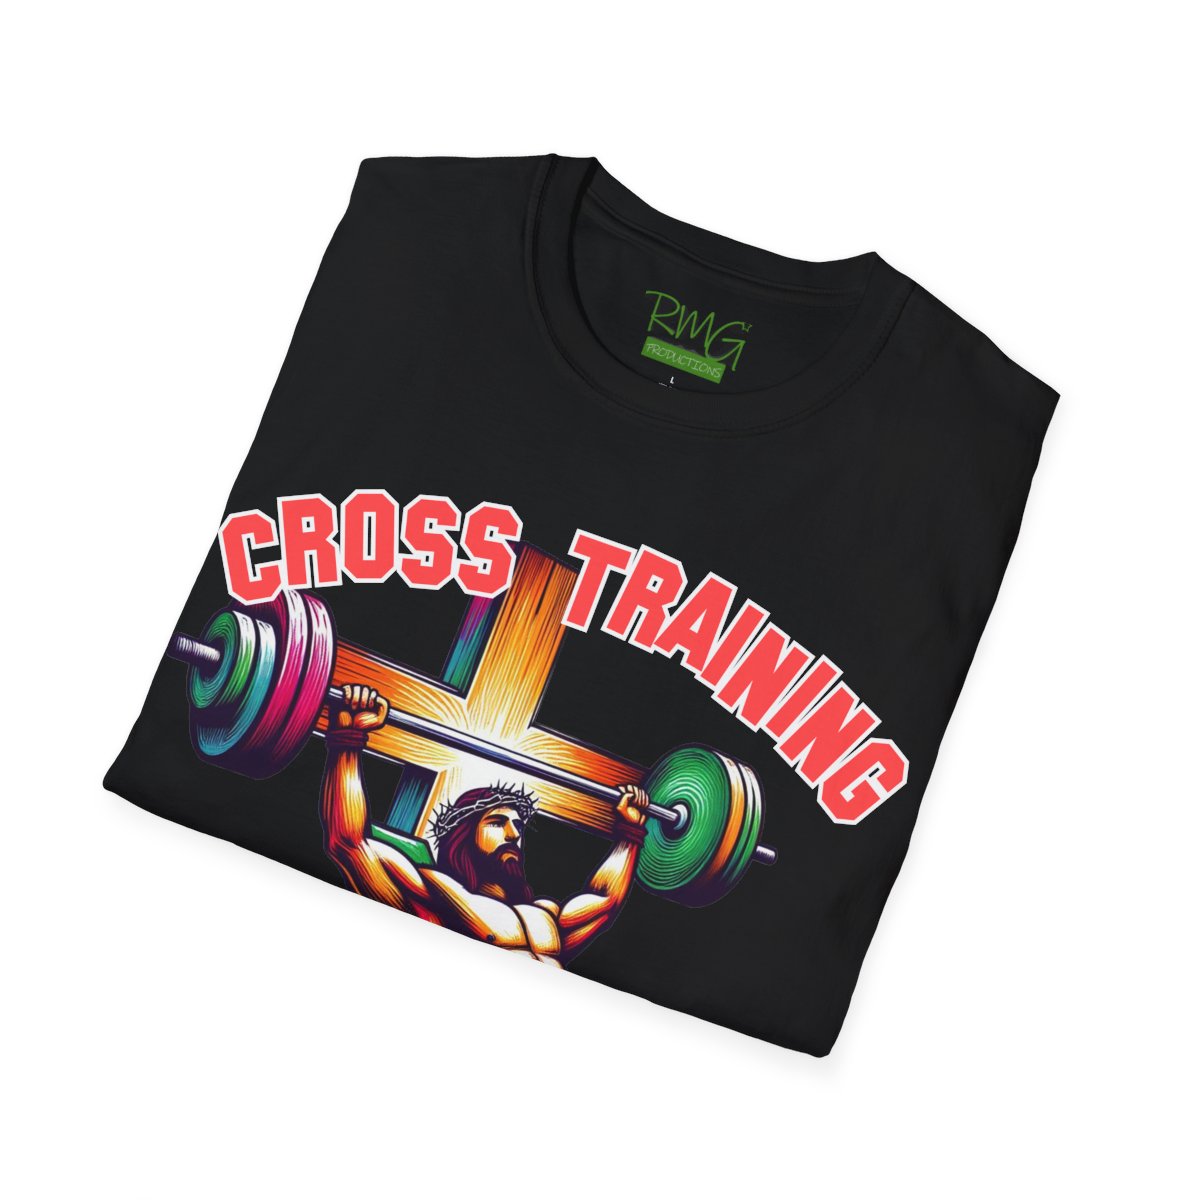 Cross Training Tees (Limited Release/Deep Discounts) product thumbnail image